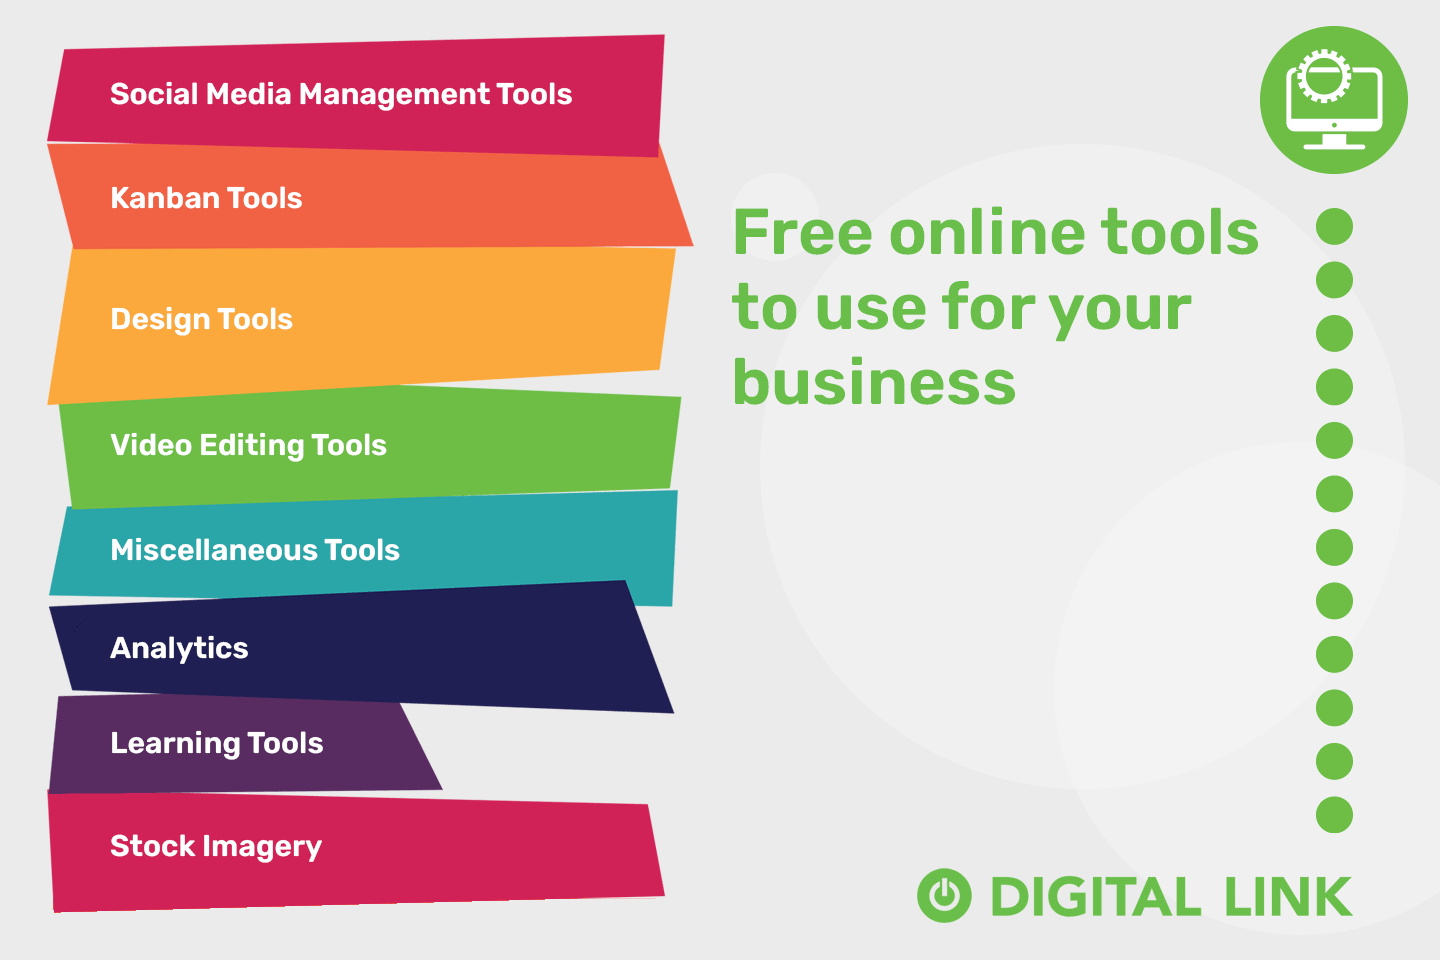 Free online tools to use for your business